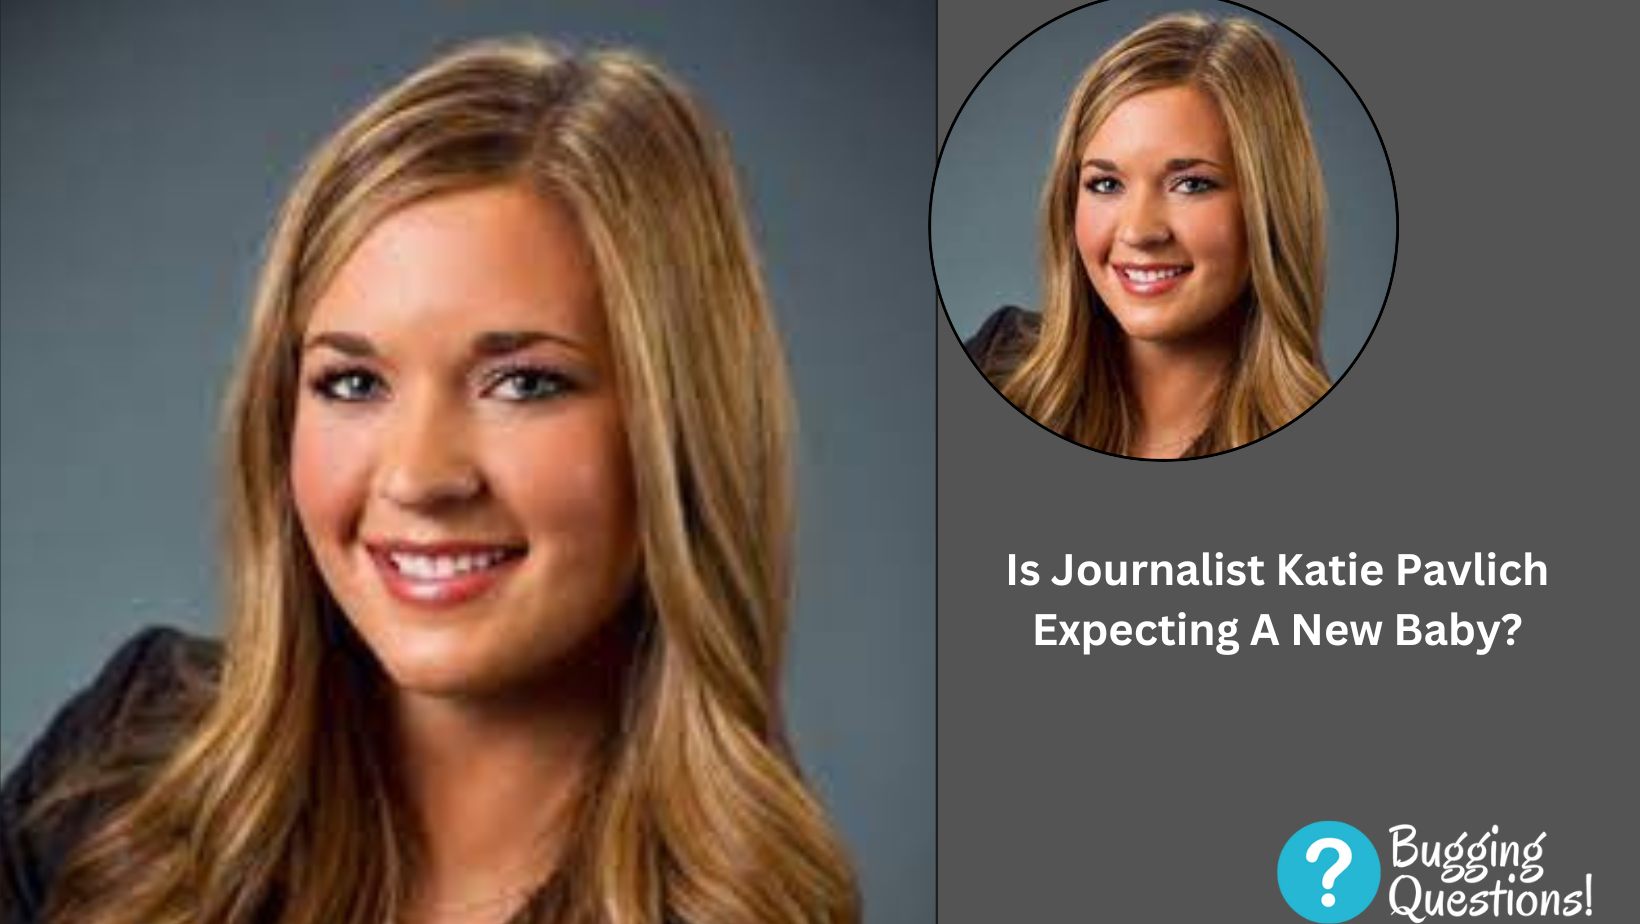 Is Journalist Katie Pavlich Expecting A New Baby?